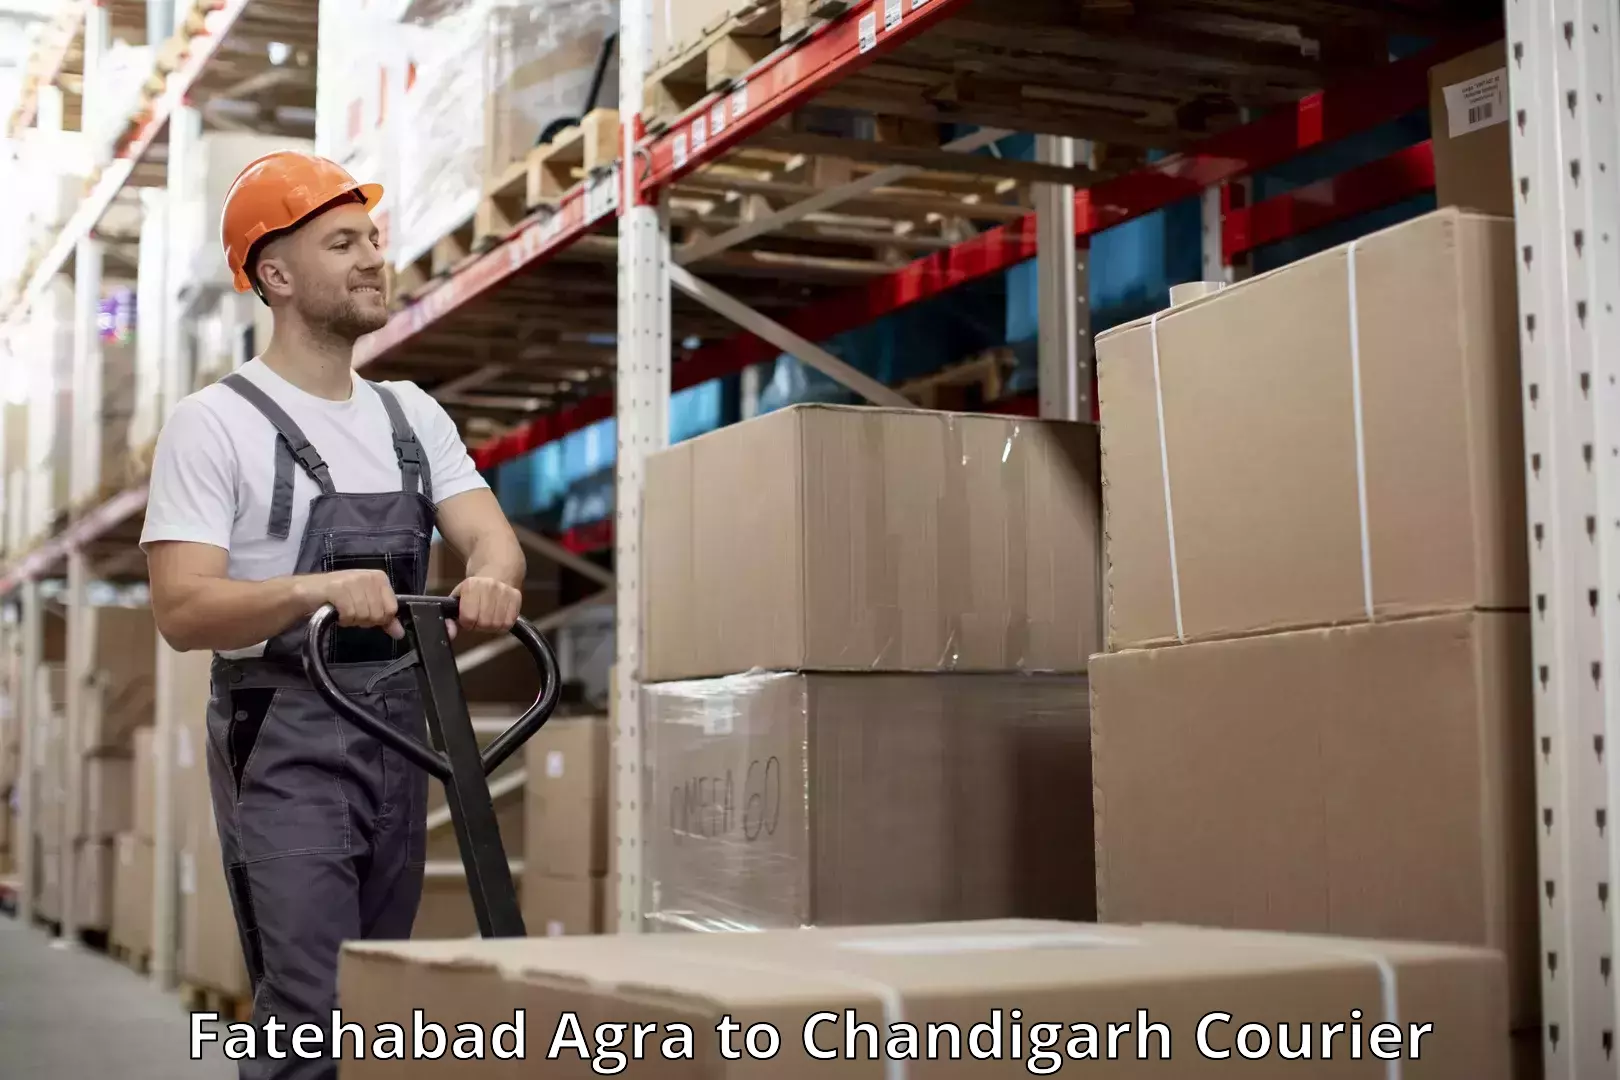 Luggage transfer service in Fatehabad Agra to Chandigarh